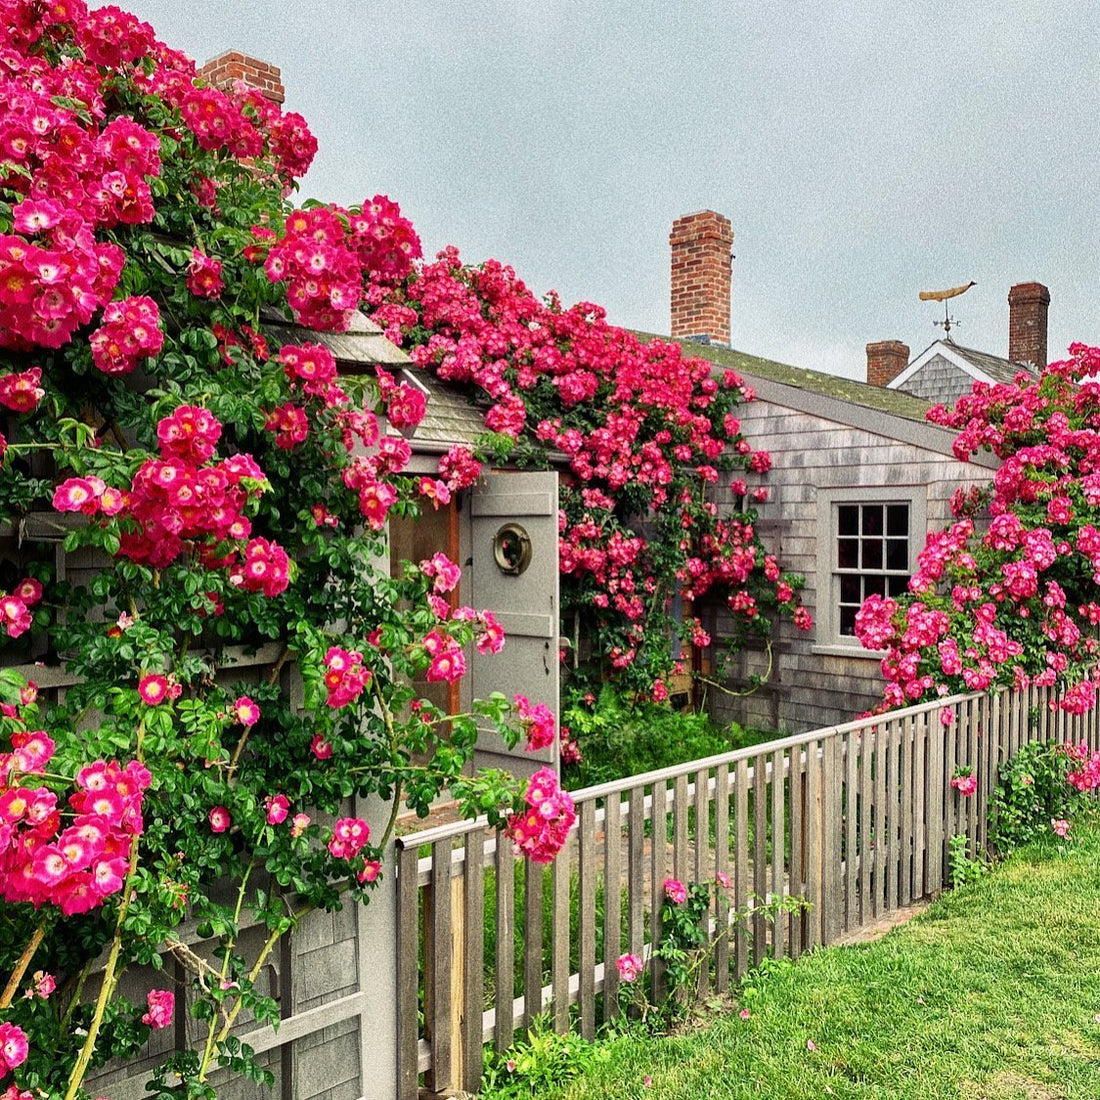 A Nantucket Summer: A Few of Our Favorite Things | Res Ipsa - RES IPSA